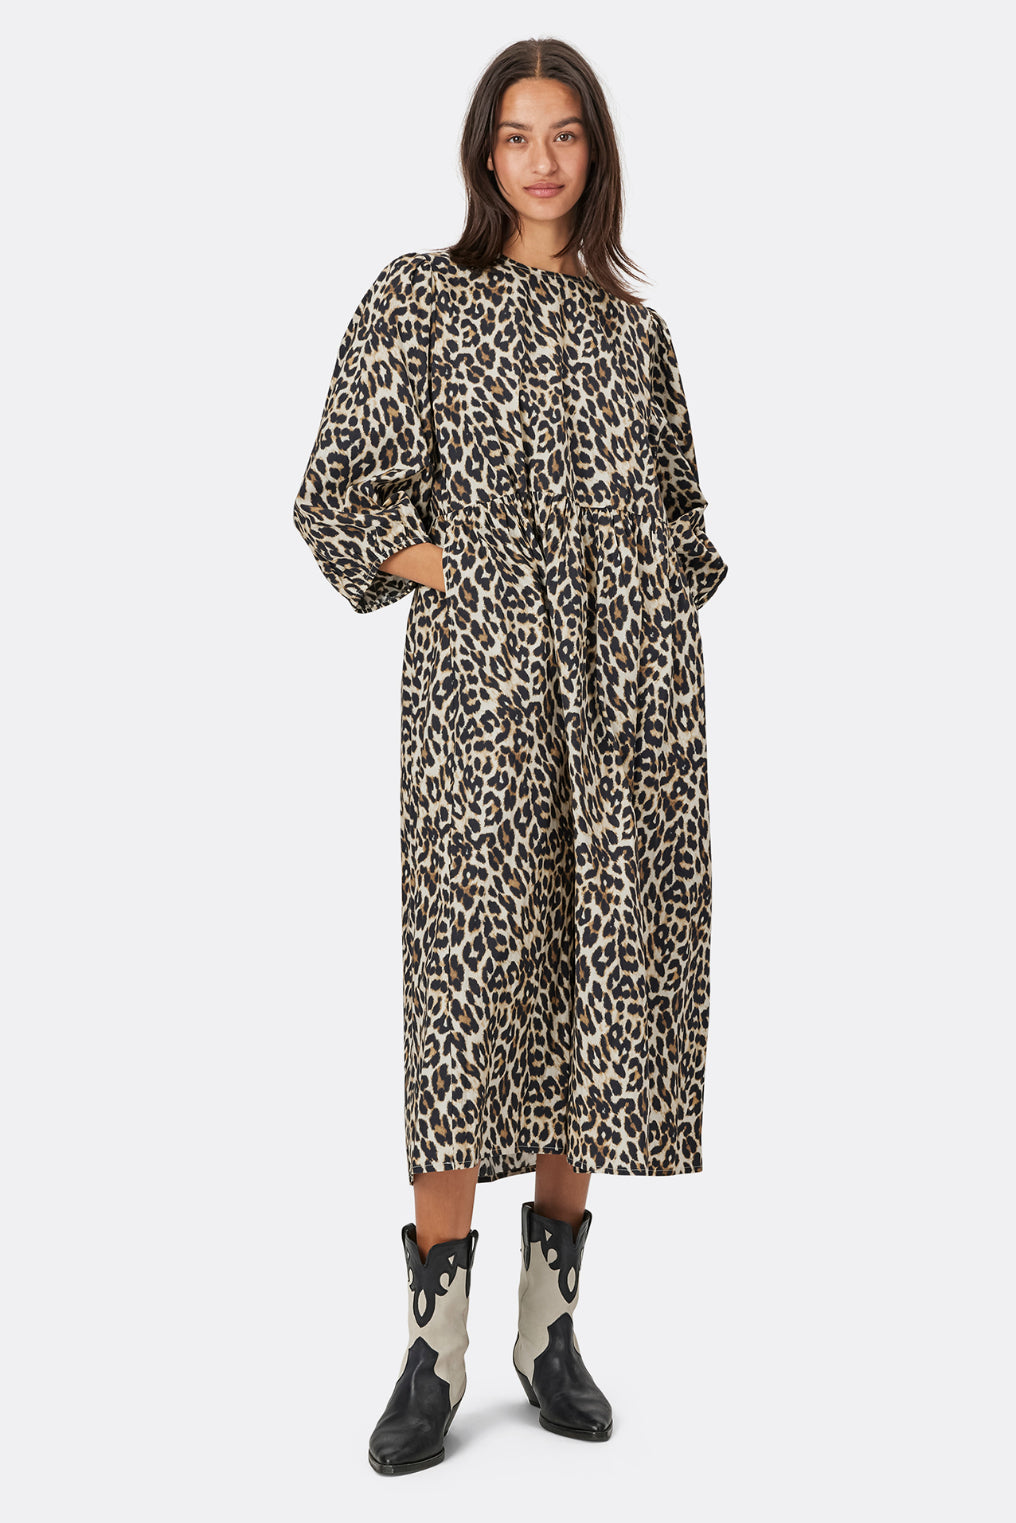 Lolly's Laundry Marion Dress - Leopard